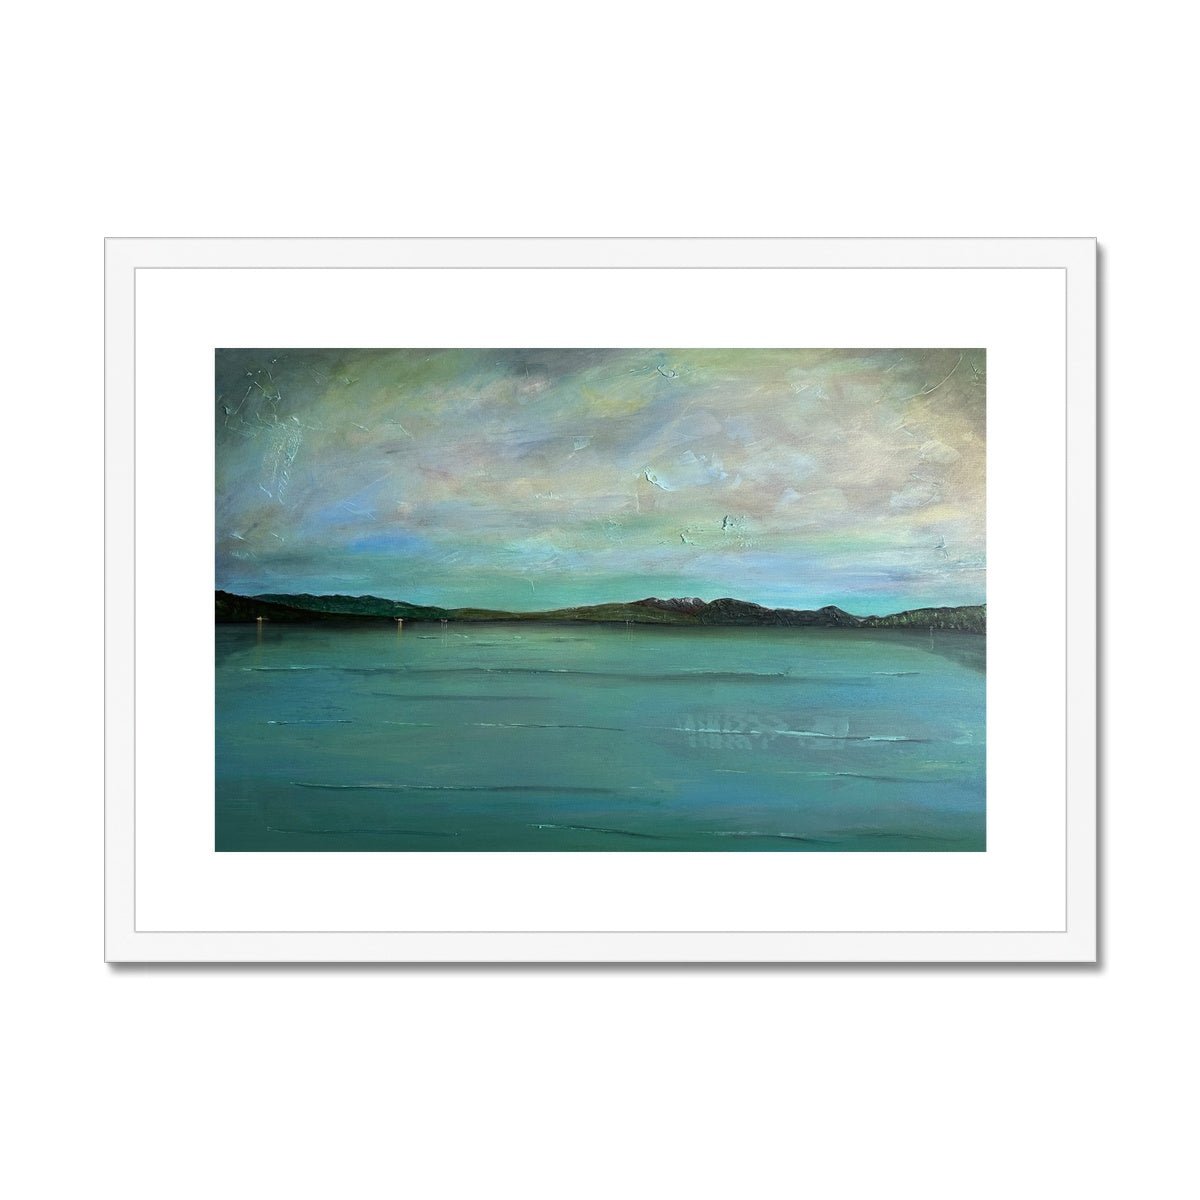 An Emerald Loch Lomond Painting | Framed & Mounted Prints From Scotland-Framed & Mounted Prints-Scottish Lochs & Mountains Art Gallery-A2 Landscape-White Frame-Paintings, Prints, Homeware, Art Gifts From Scotland By Scottish Artist Kevin Hunter